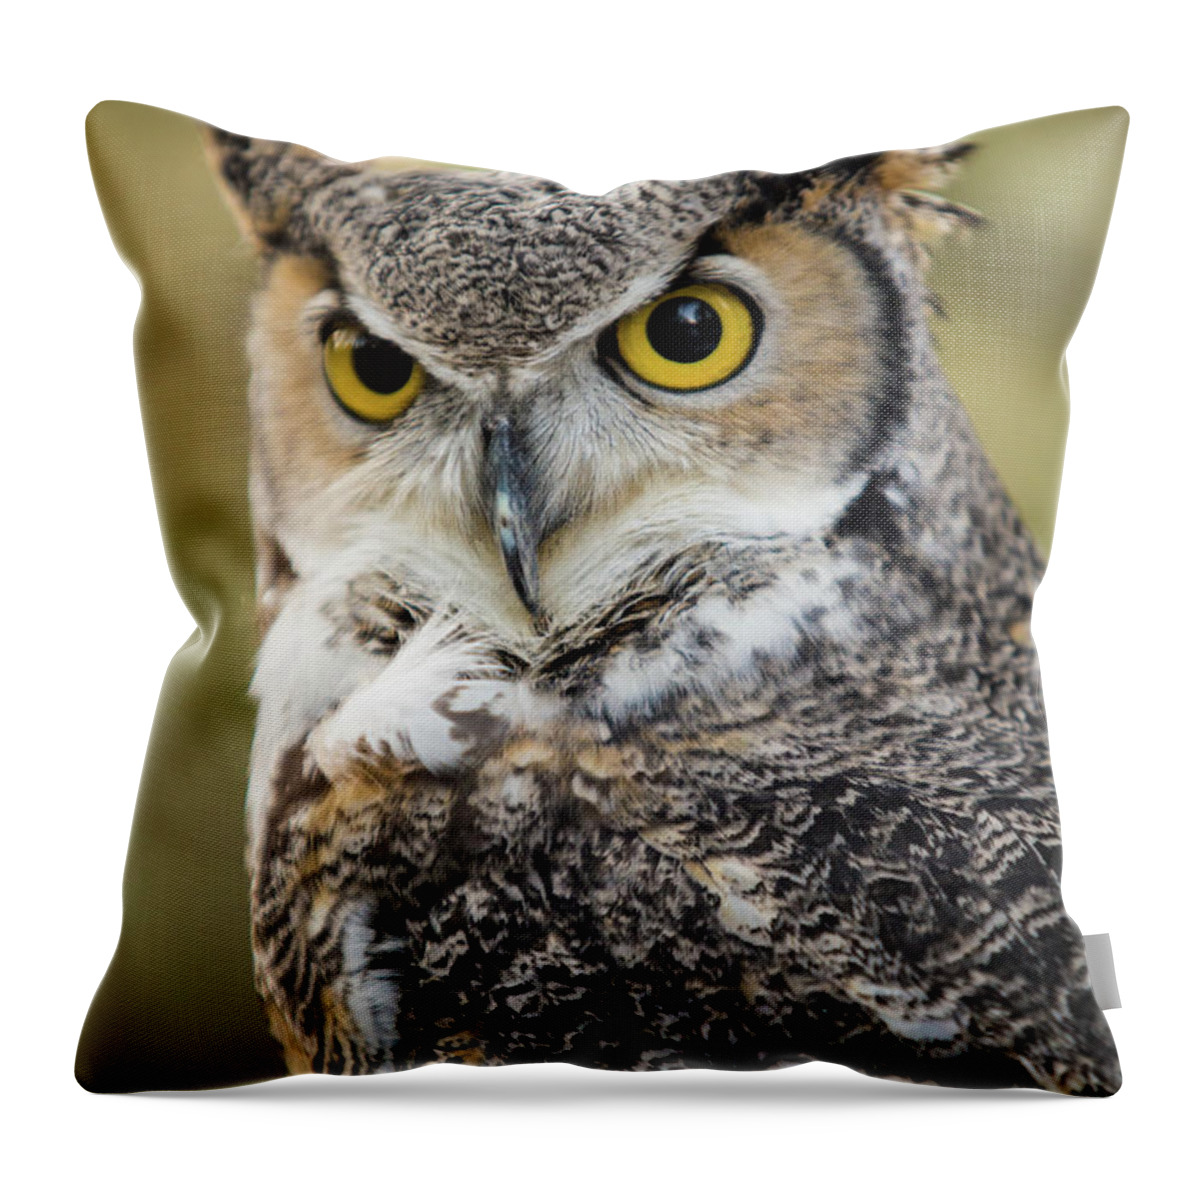 Owl Throw Pillow featuring the photograph Great Horned Owl by Wesley Aston